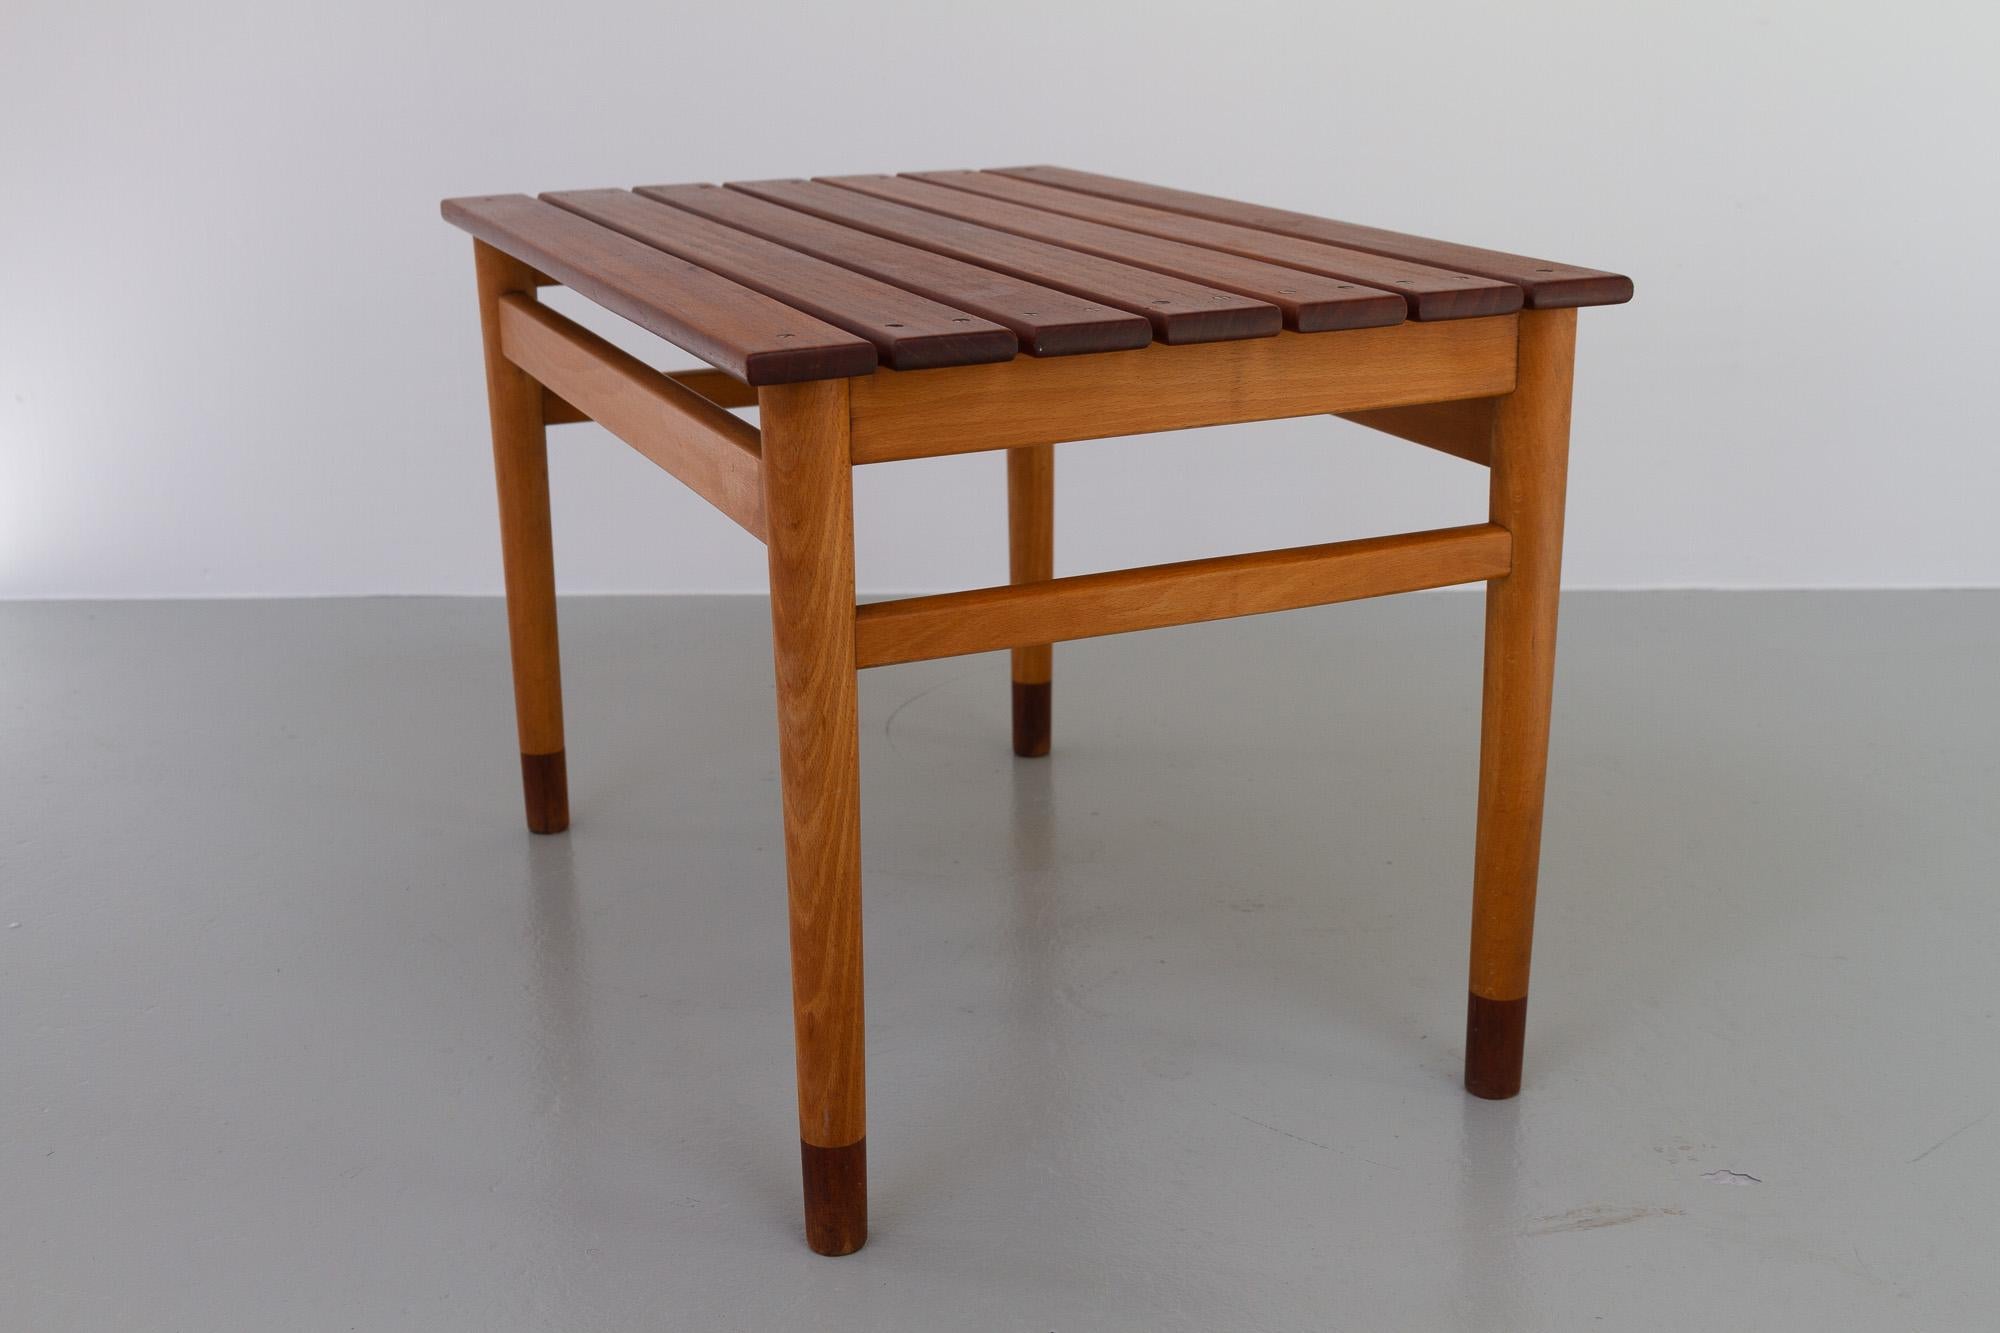 Mid-20th Century Danish Modern Teak and Beech Bench, 1950s For Sale